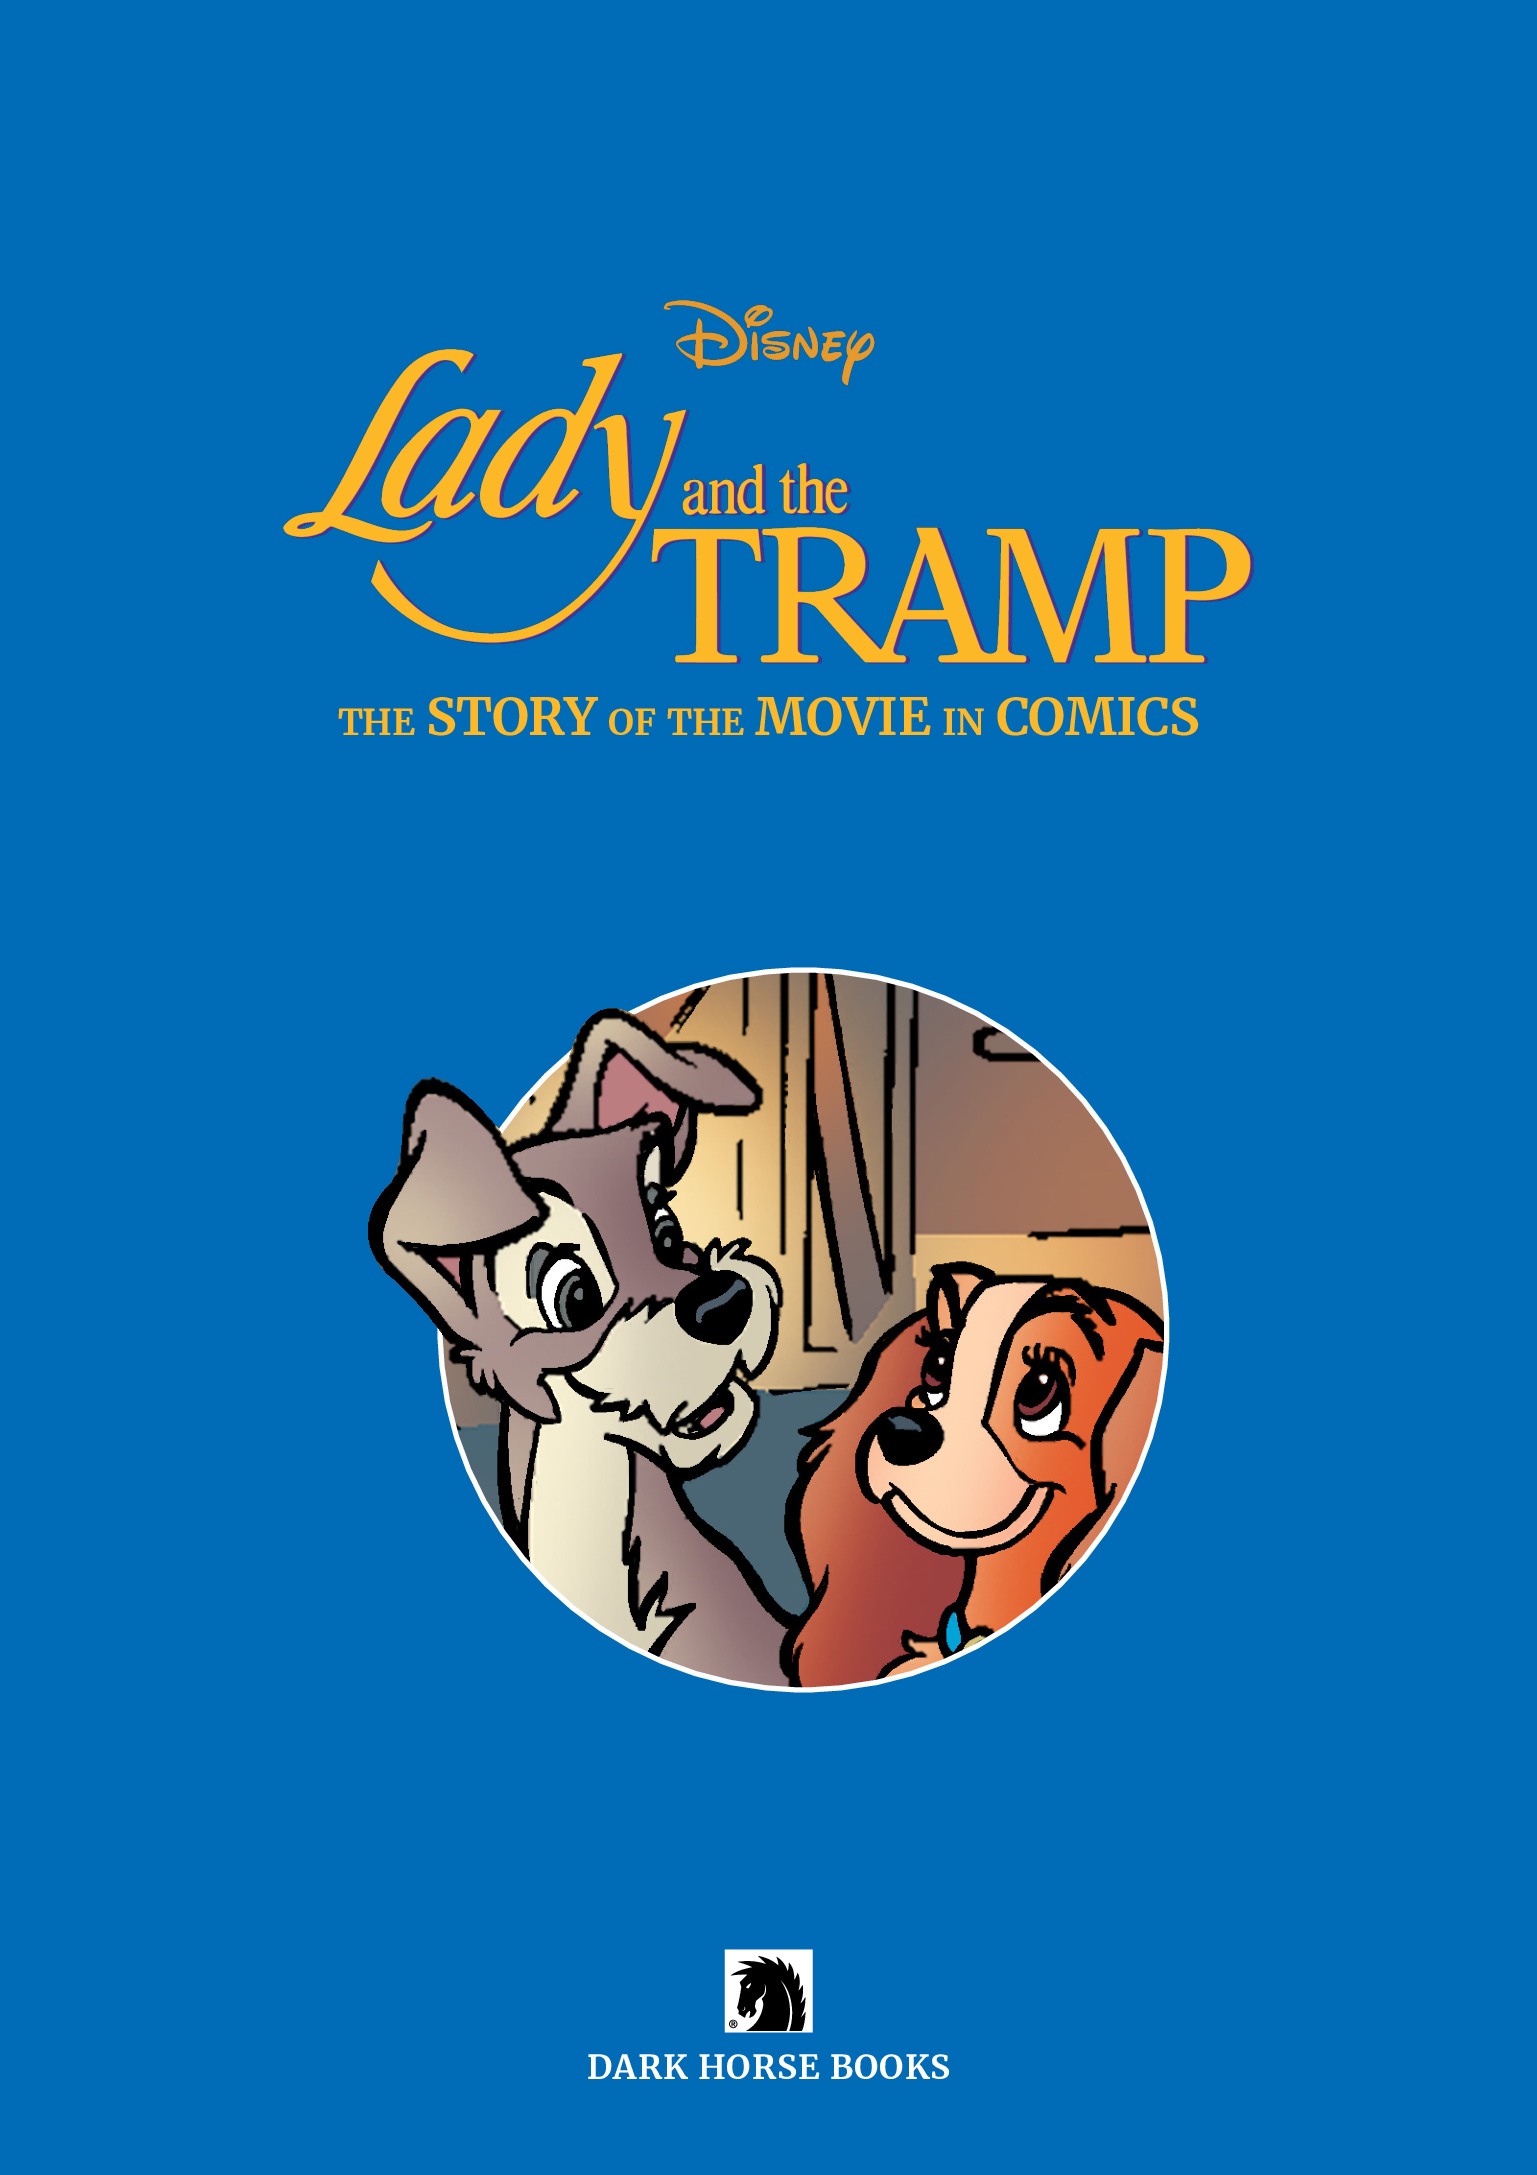 Read online Disney Lady and the Tramp: The Story of the Movie in Comics comic -  Issue # Full - 2